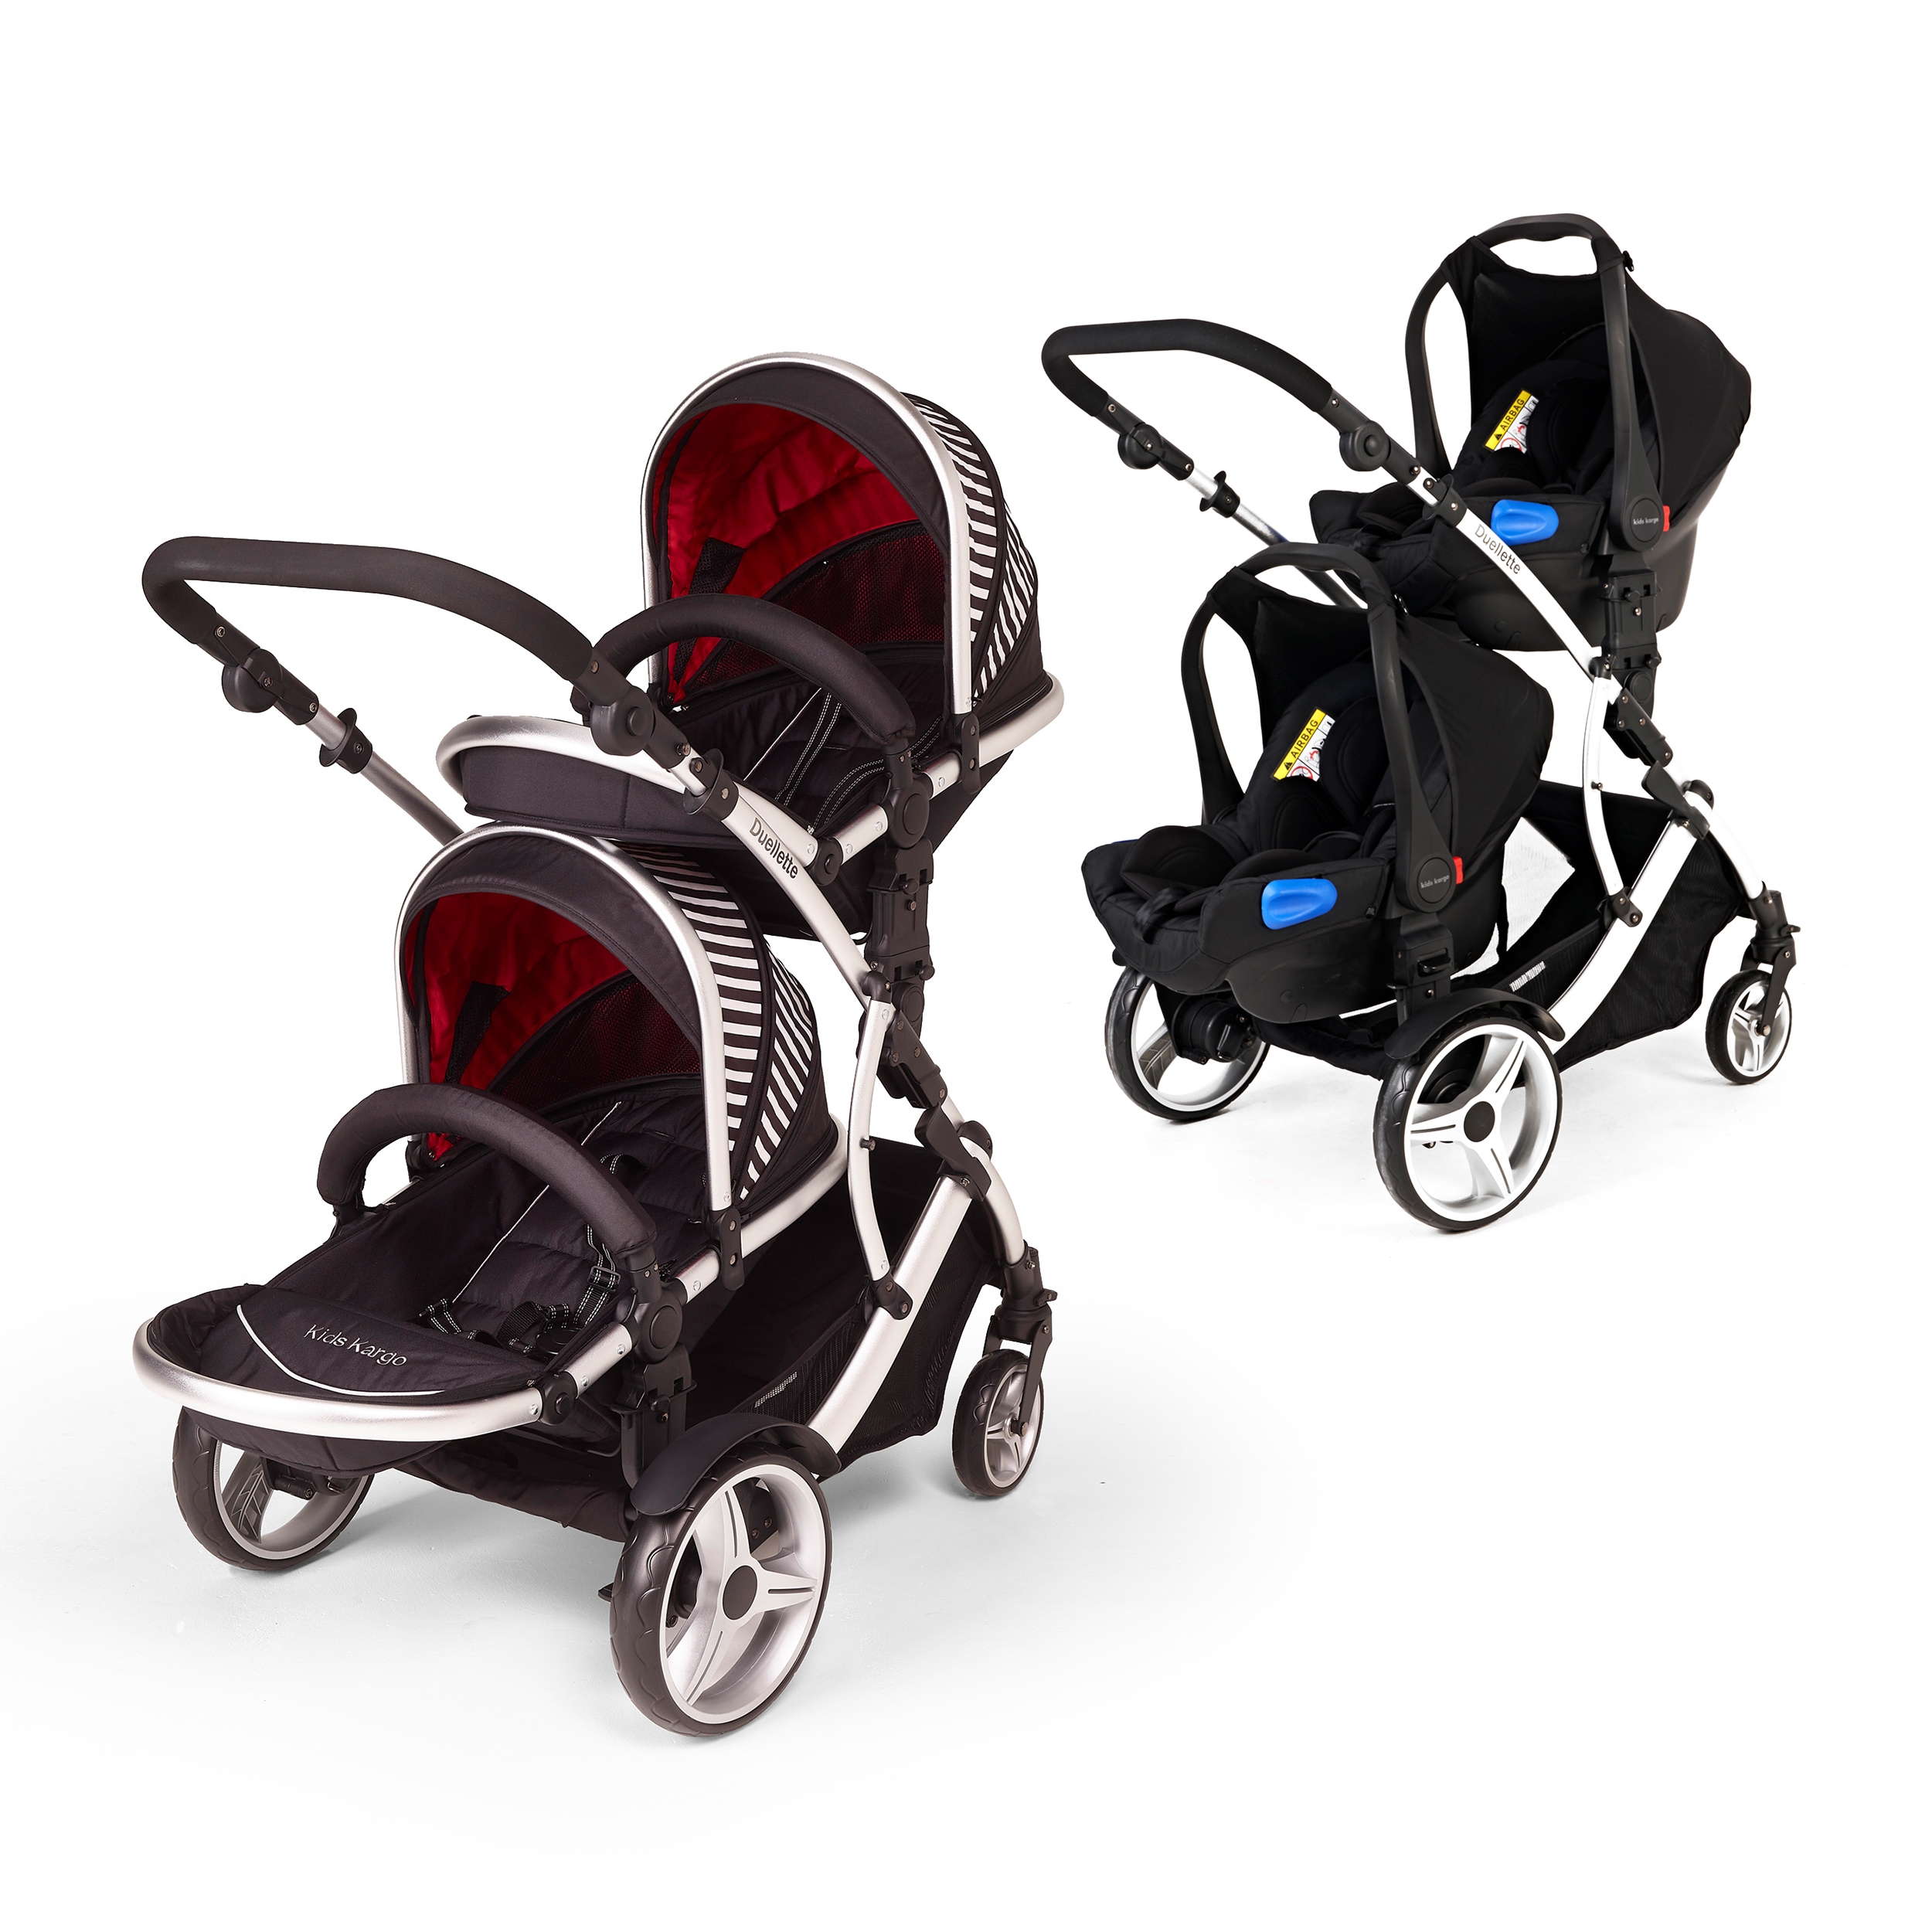 Buy Now Pay Later Kids Kargo Duellette Hybrid with 2 Isofix Car Seats Travel System Double Tandem Twin Pushchair Pram